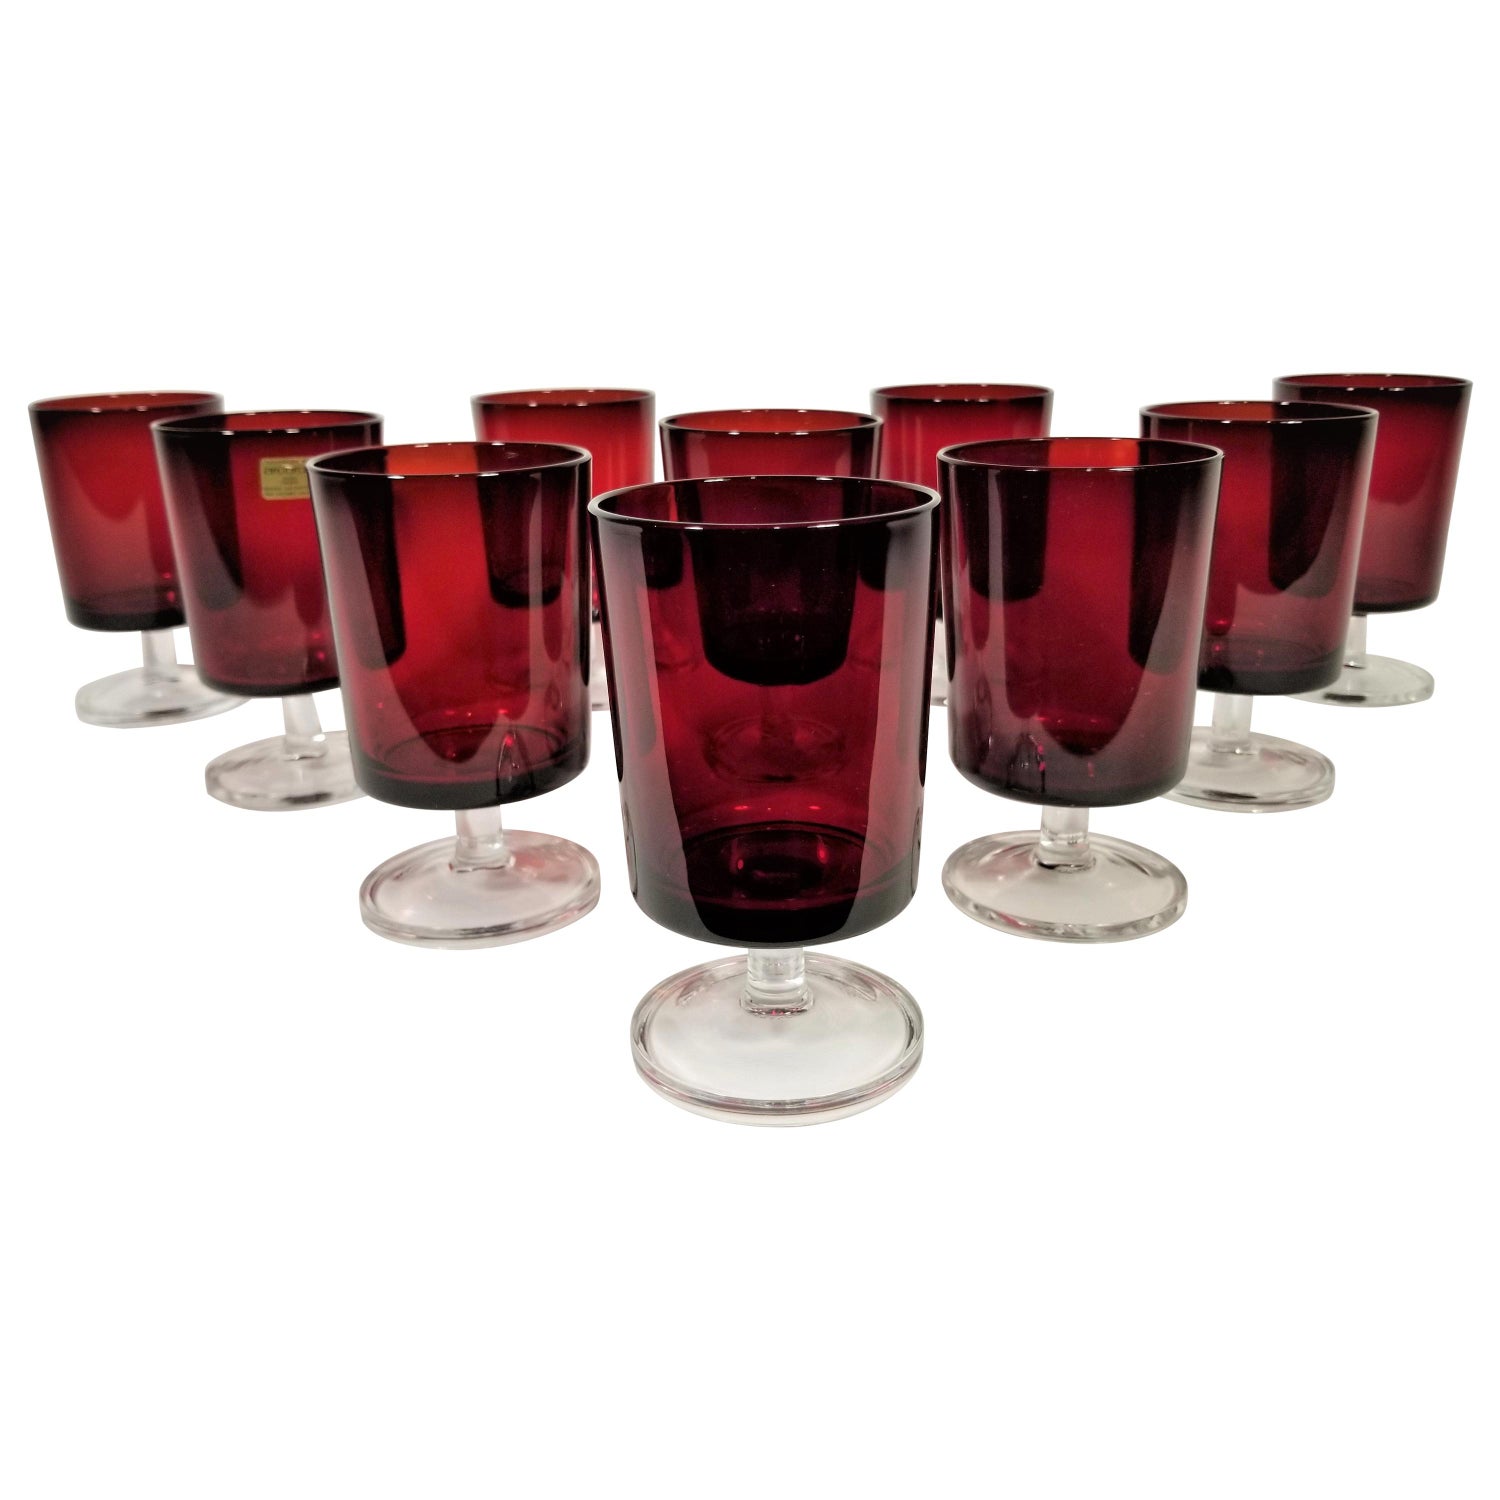 https://a.1stdibscdn.com/french-stemware-glassware-ruby-red-1960s-mid-century-france-set-f-10-for-sale/1121189/f_216874821607397888957/21687482_master.jpg?width=1500